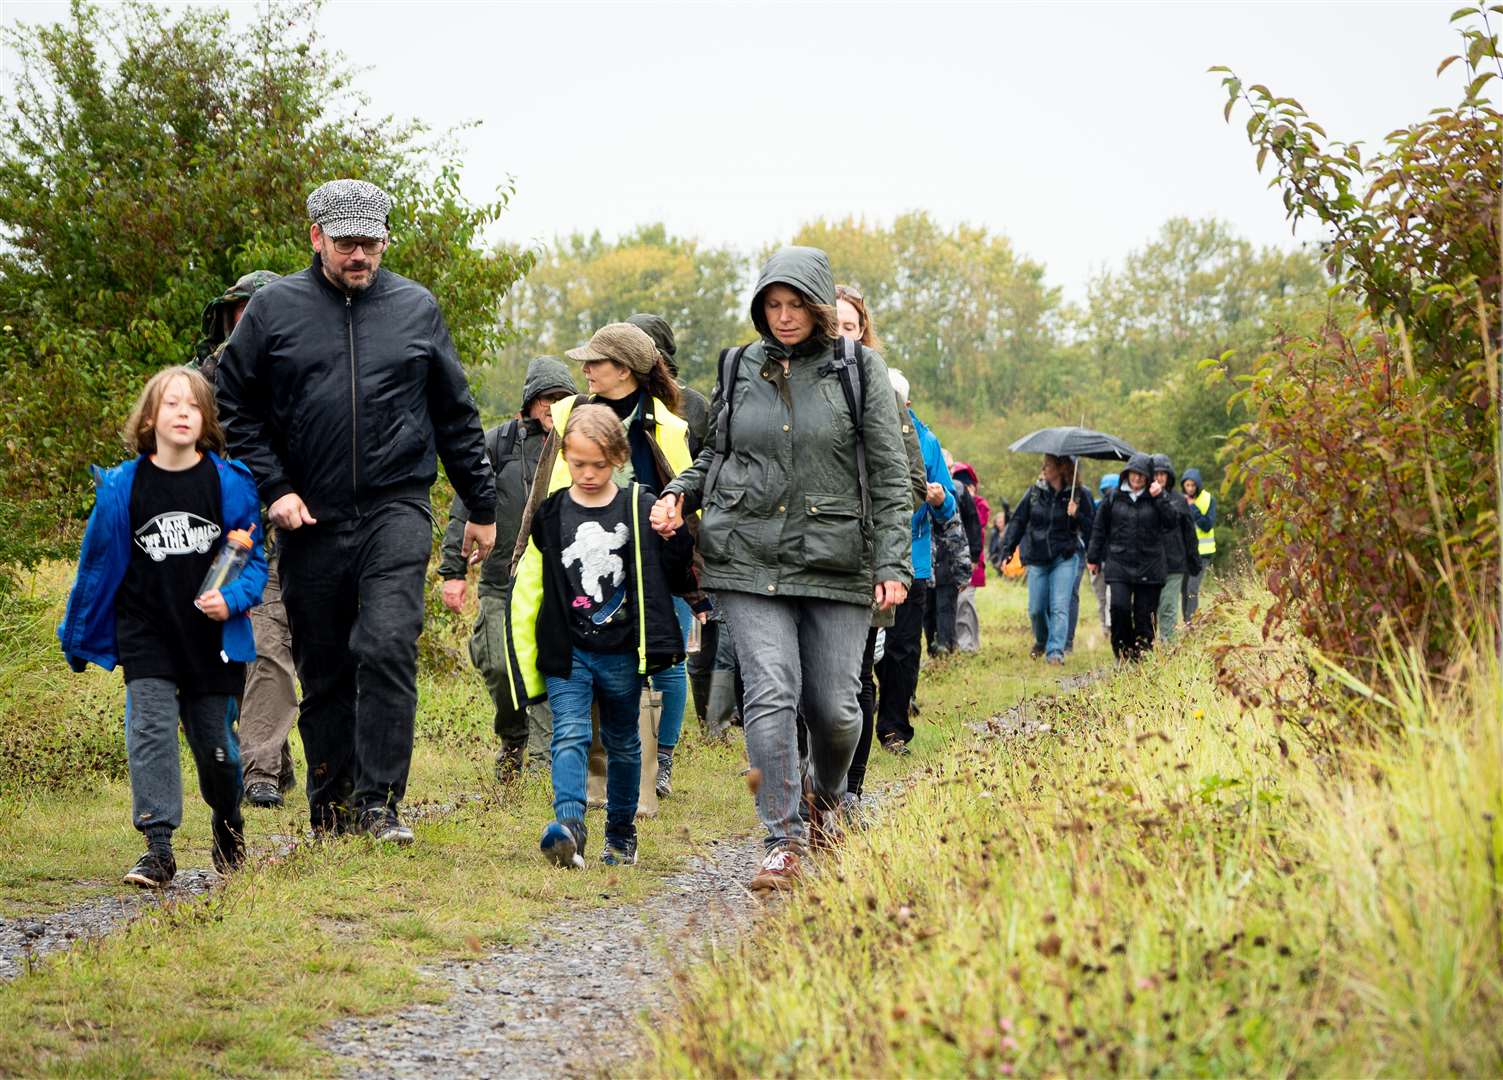 Visitors touring the Swanscombe Marshes. Photo: Richard Bayfield